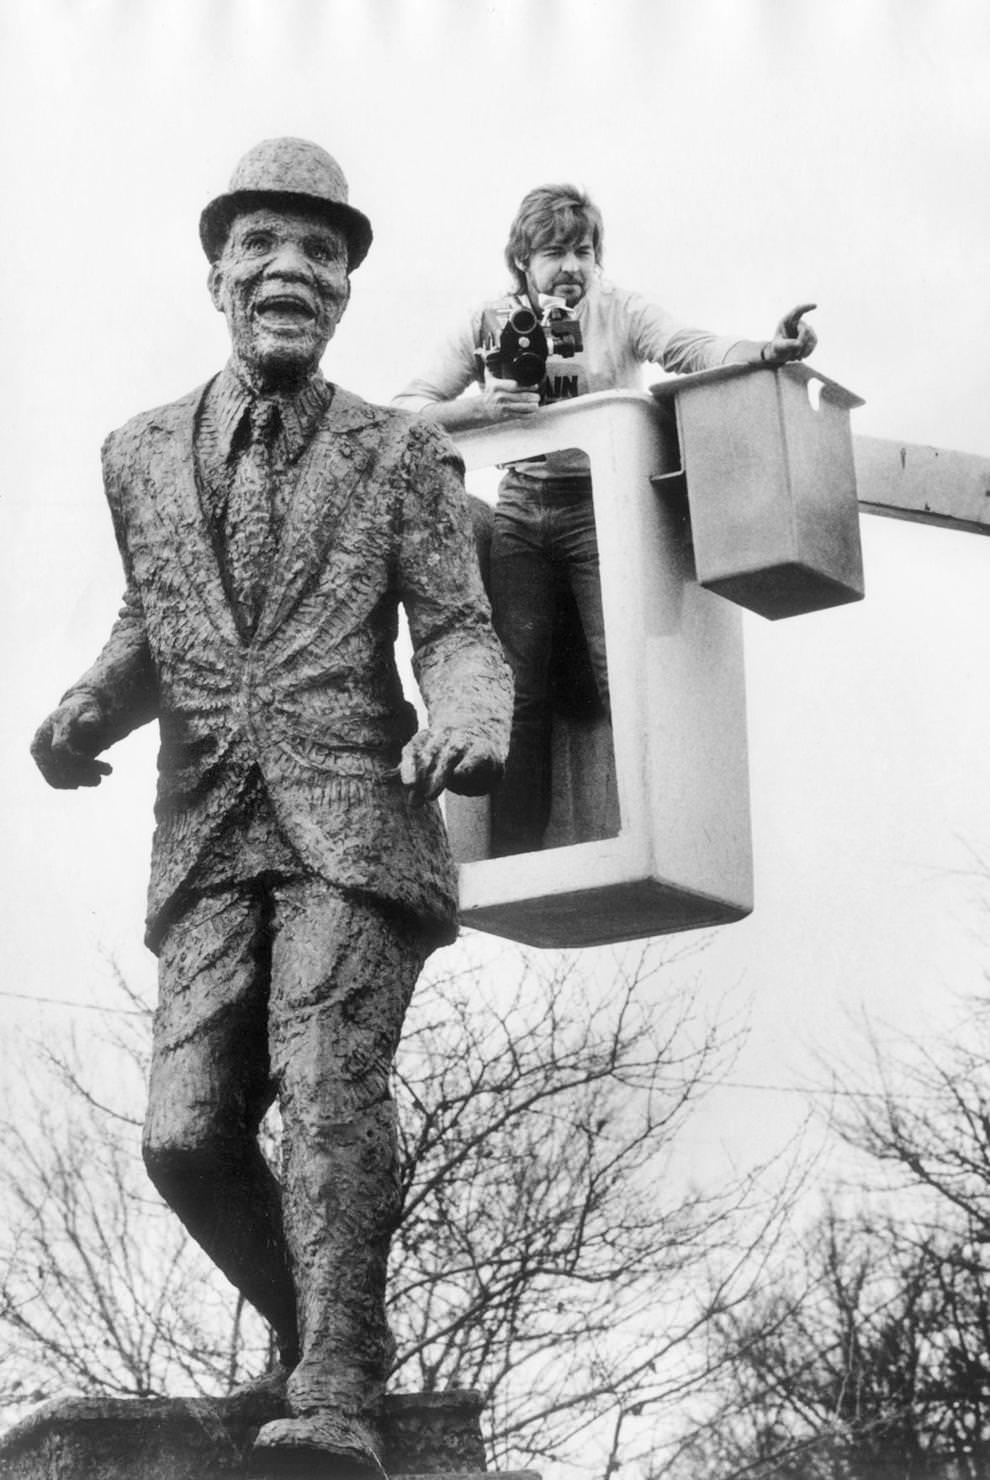 Director Wayne Westbrook filmed a scene at the Bill “Bojangles” Robinson statue in Jackson Ward as part of a documentary about Richmond, 1986.